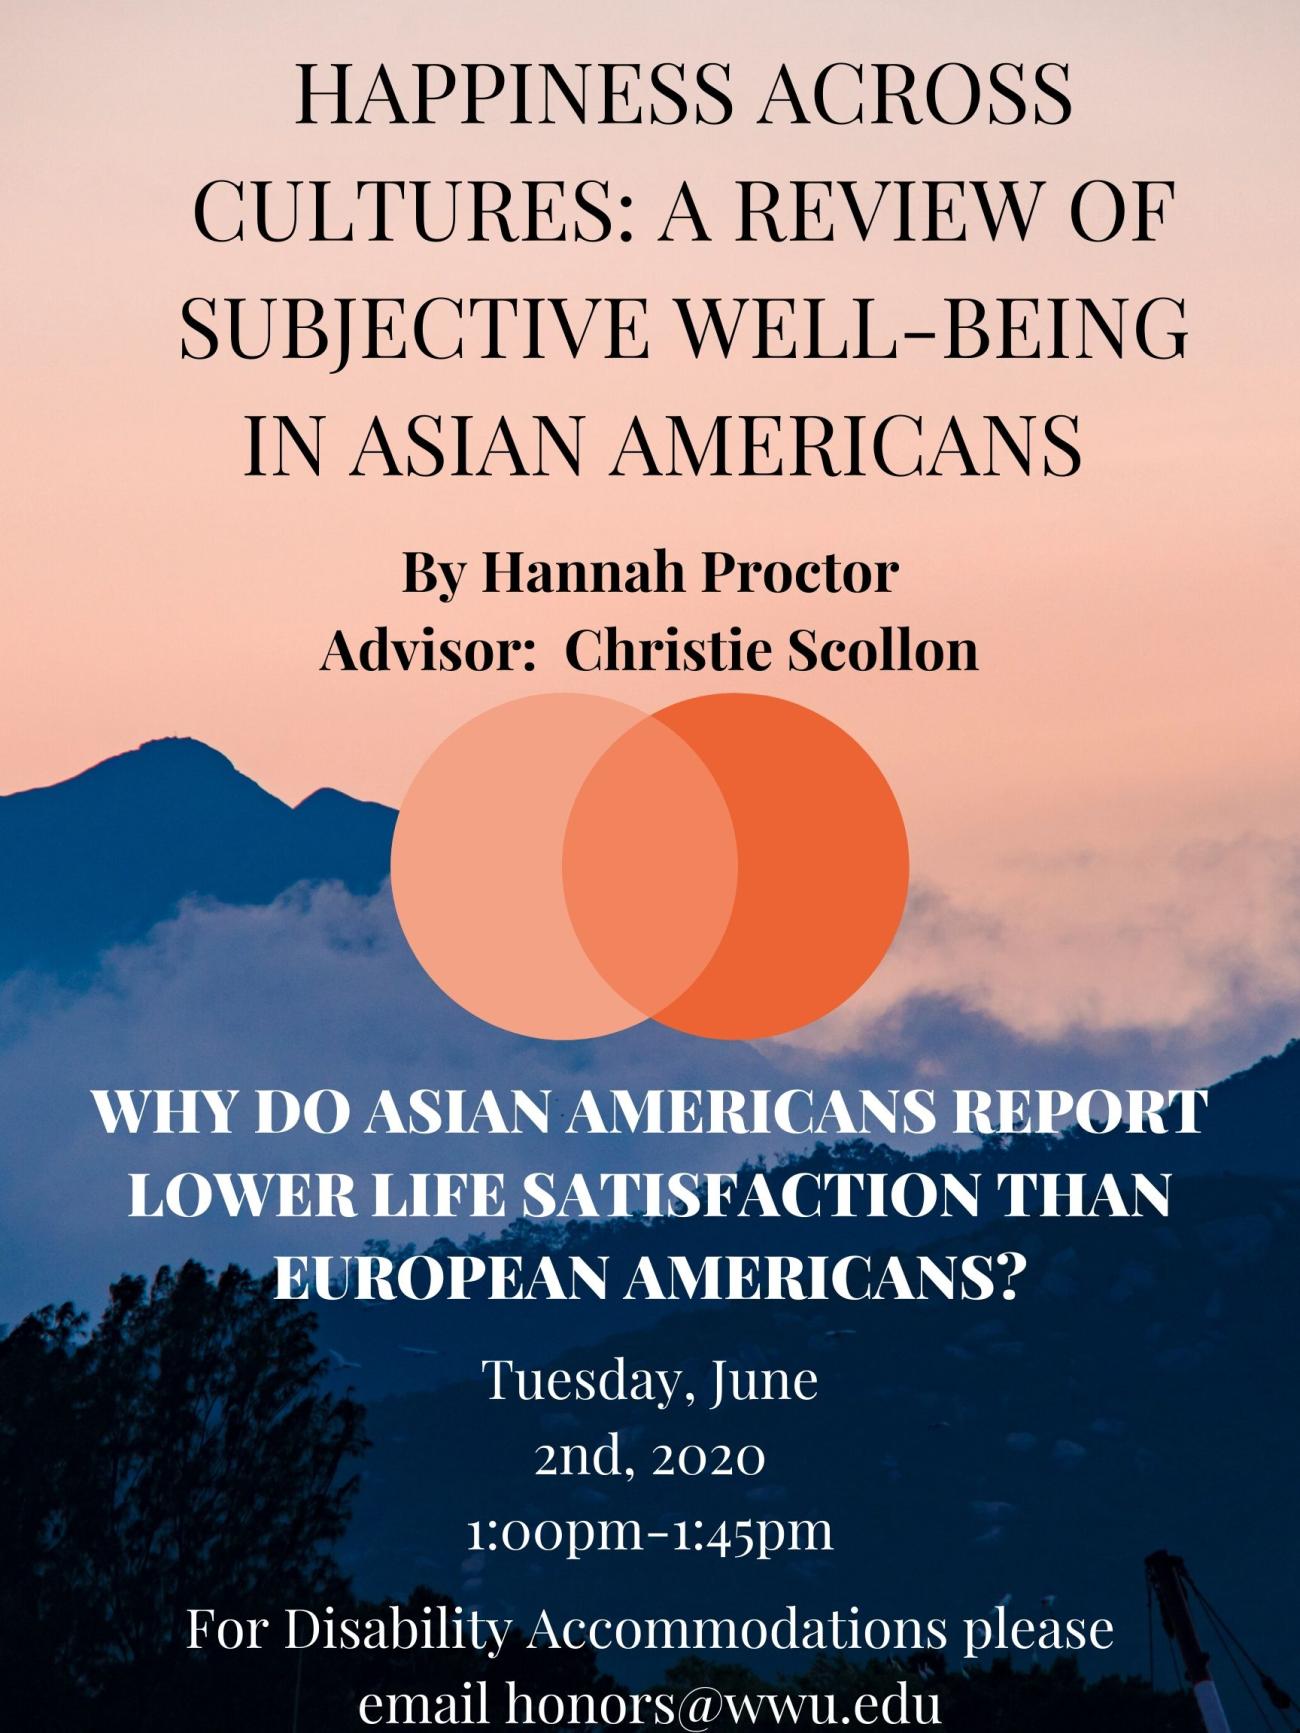 Image: Landscape of grey mountains with pink sky and a tree in the foreground. Pink circle and orange circle overlapping one another in the center.  Text Reads:  "Happiness Across Cultures: A Review of Subjective Well-Being in Asian Americans" "By Hannah Proctor" "Advisor: Christie Scollon" "Why do Asian Americans report lower life satisfaction than European Americans?" "Tuesday, June 2nd, 2020 1:00pm-1:45pm" "For disability accommodations please email honors@wwu.edu"